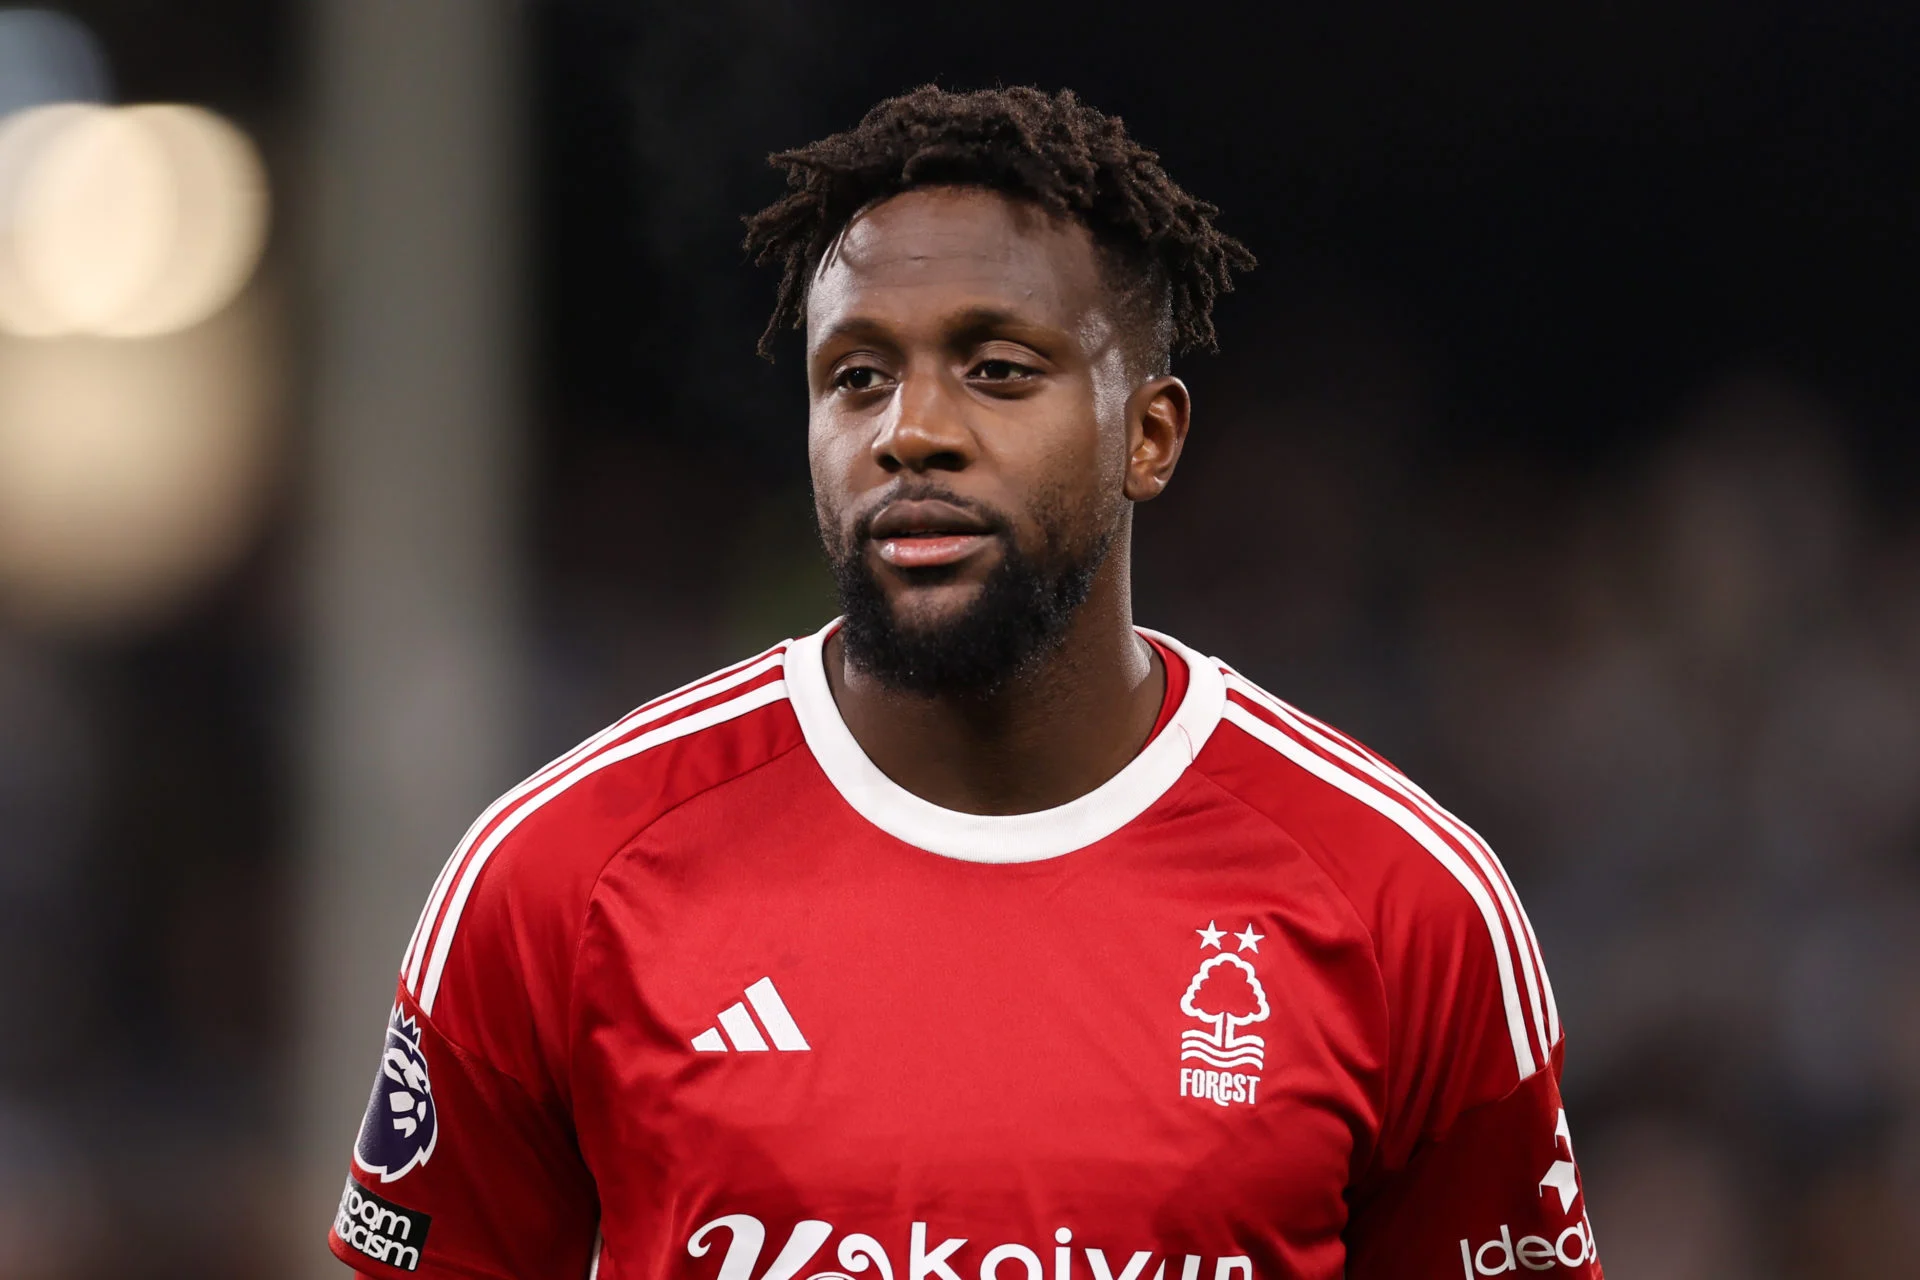 Milan offloaded Divock Origi and Fode Ballo-Touré at the last minute last summer sending them to the Premier League but will have to arrange new transfers.